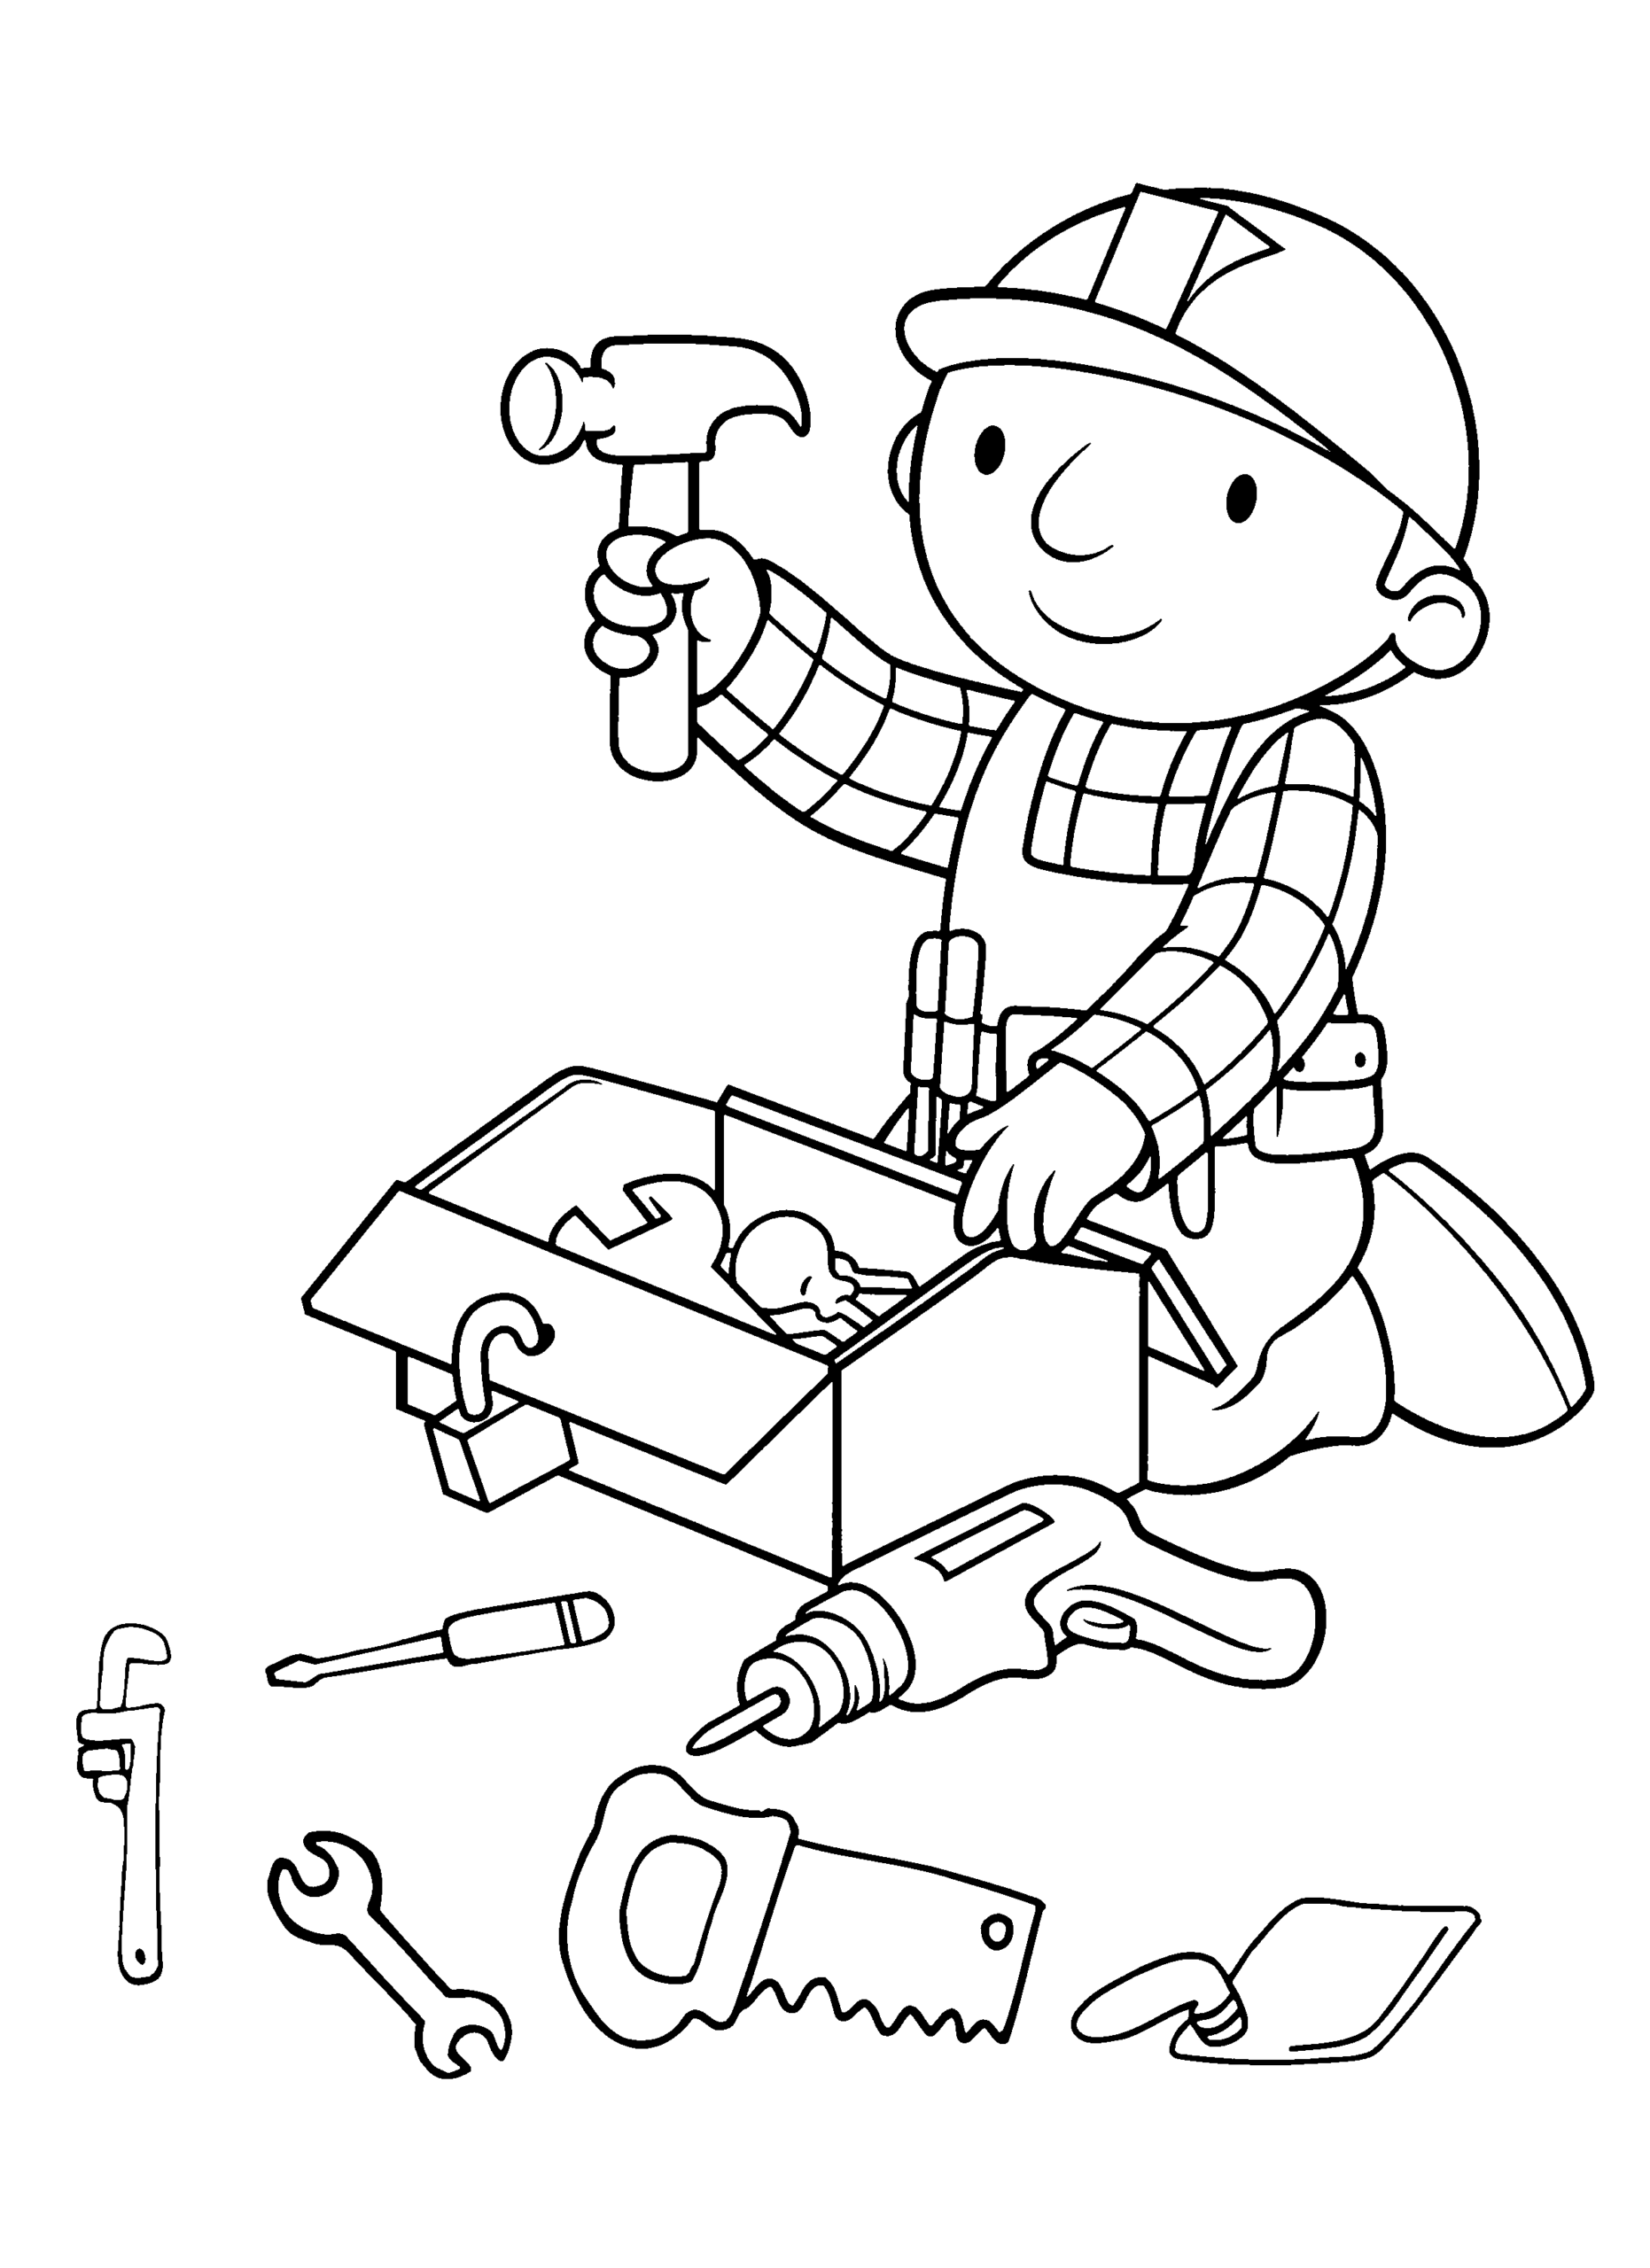 Bob the Builder Coloring Pages TV Film bob the builder 7 Printable 2020 01091 Coloring4free